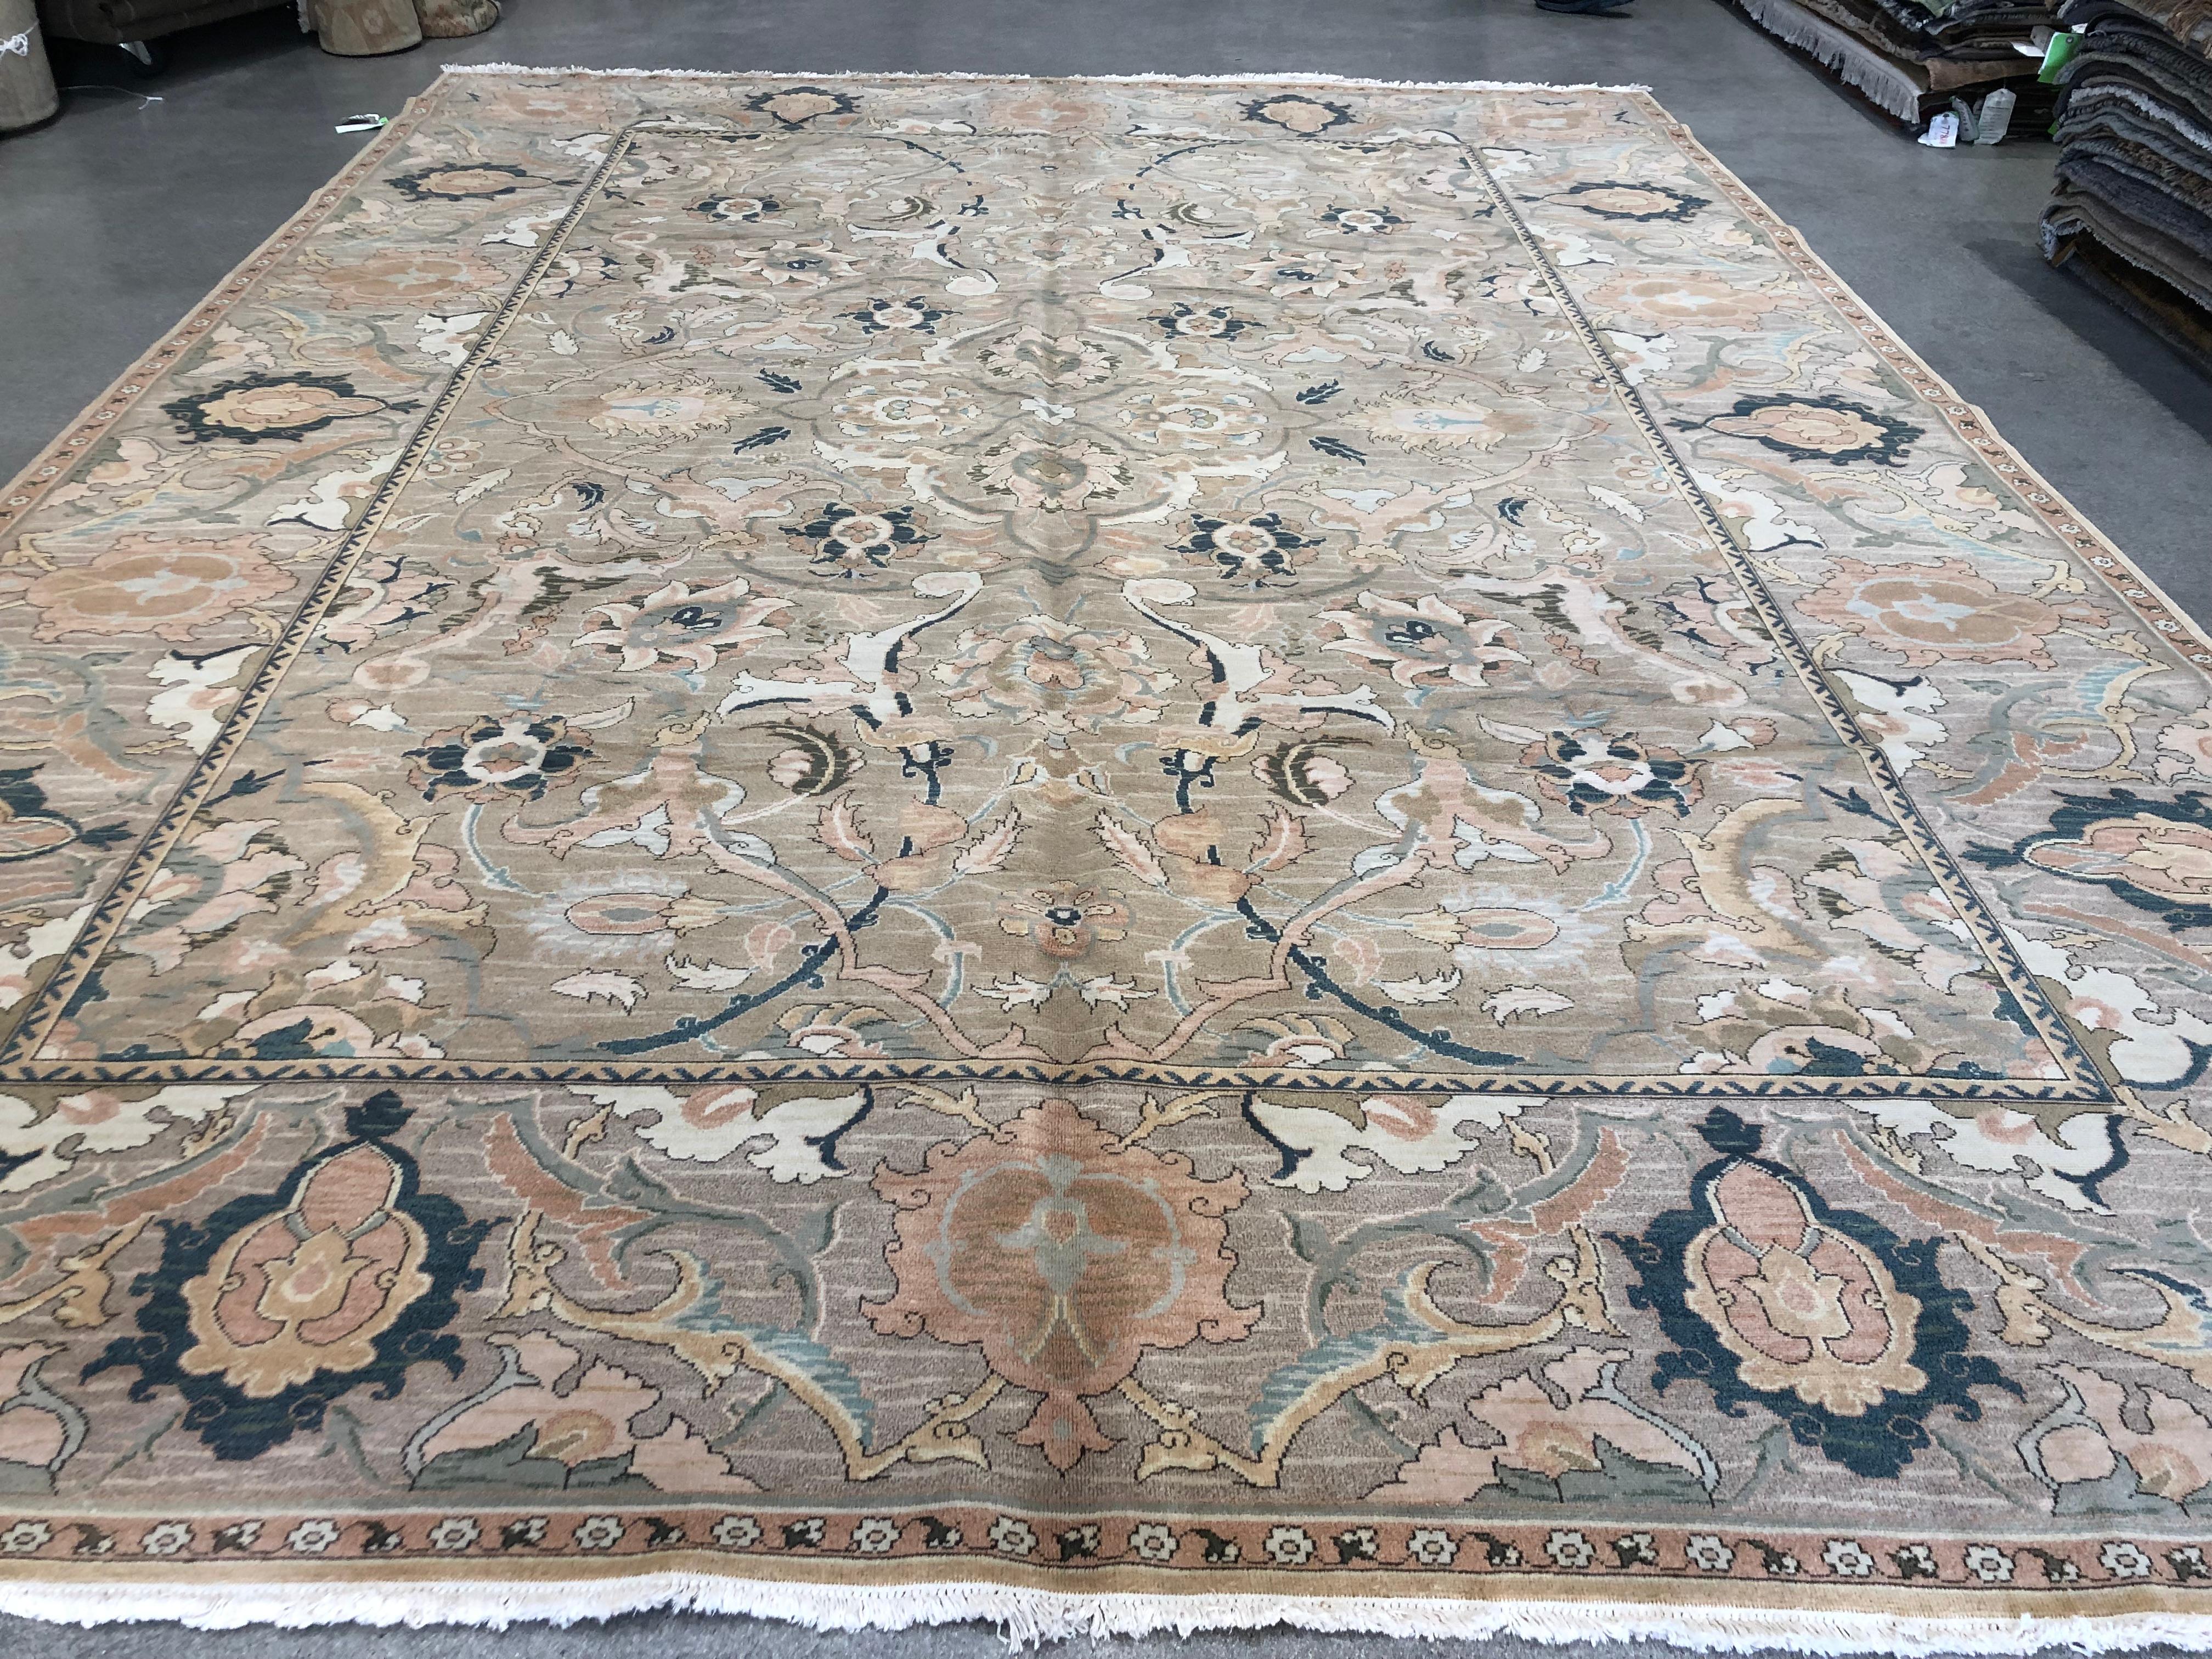 A rug that stands out for its unique design and color combination. A ribbon 'frame' creates a rug-within-a-rug look of sweeping floral designs that combines peach, cream, black and teal against a tan background. Hand knotted wool.